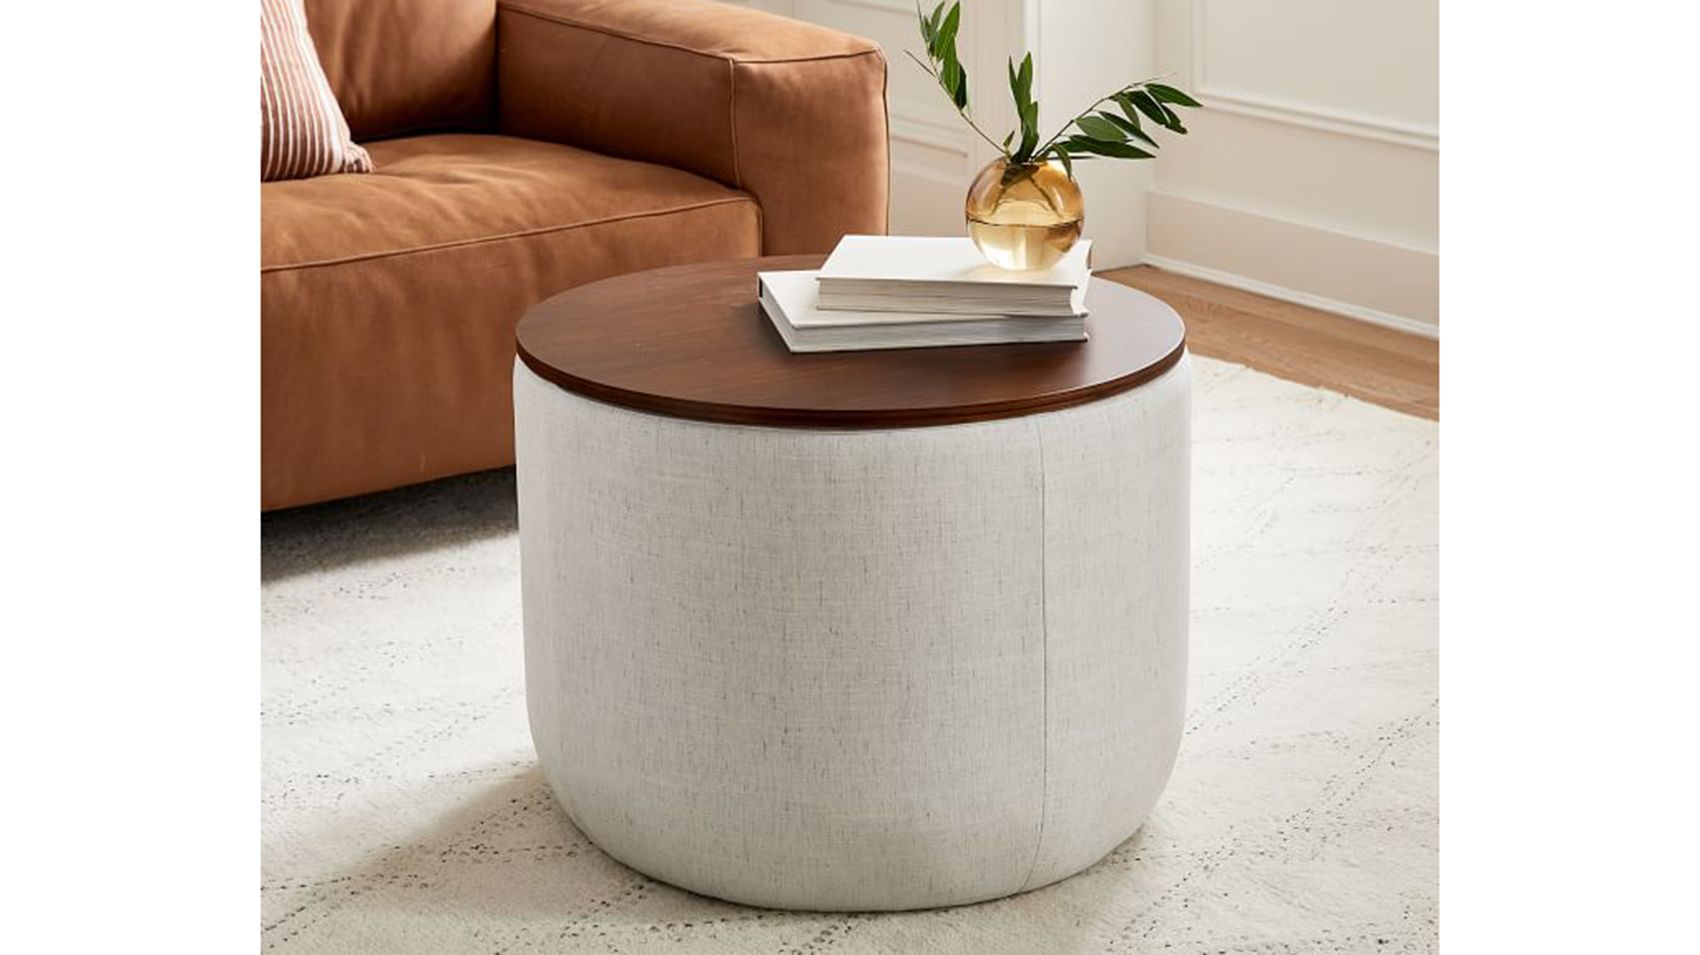 22 Best Ottomans For Storage With Style, Brown Leather Cube Storage Ottoman With Tray